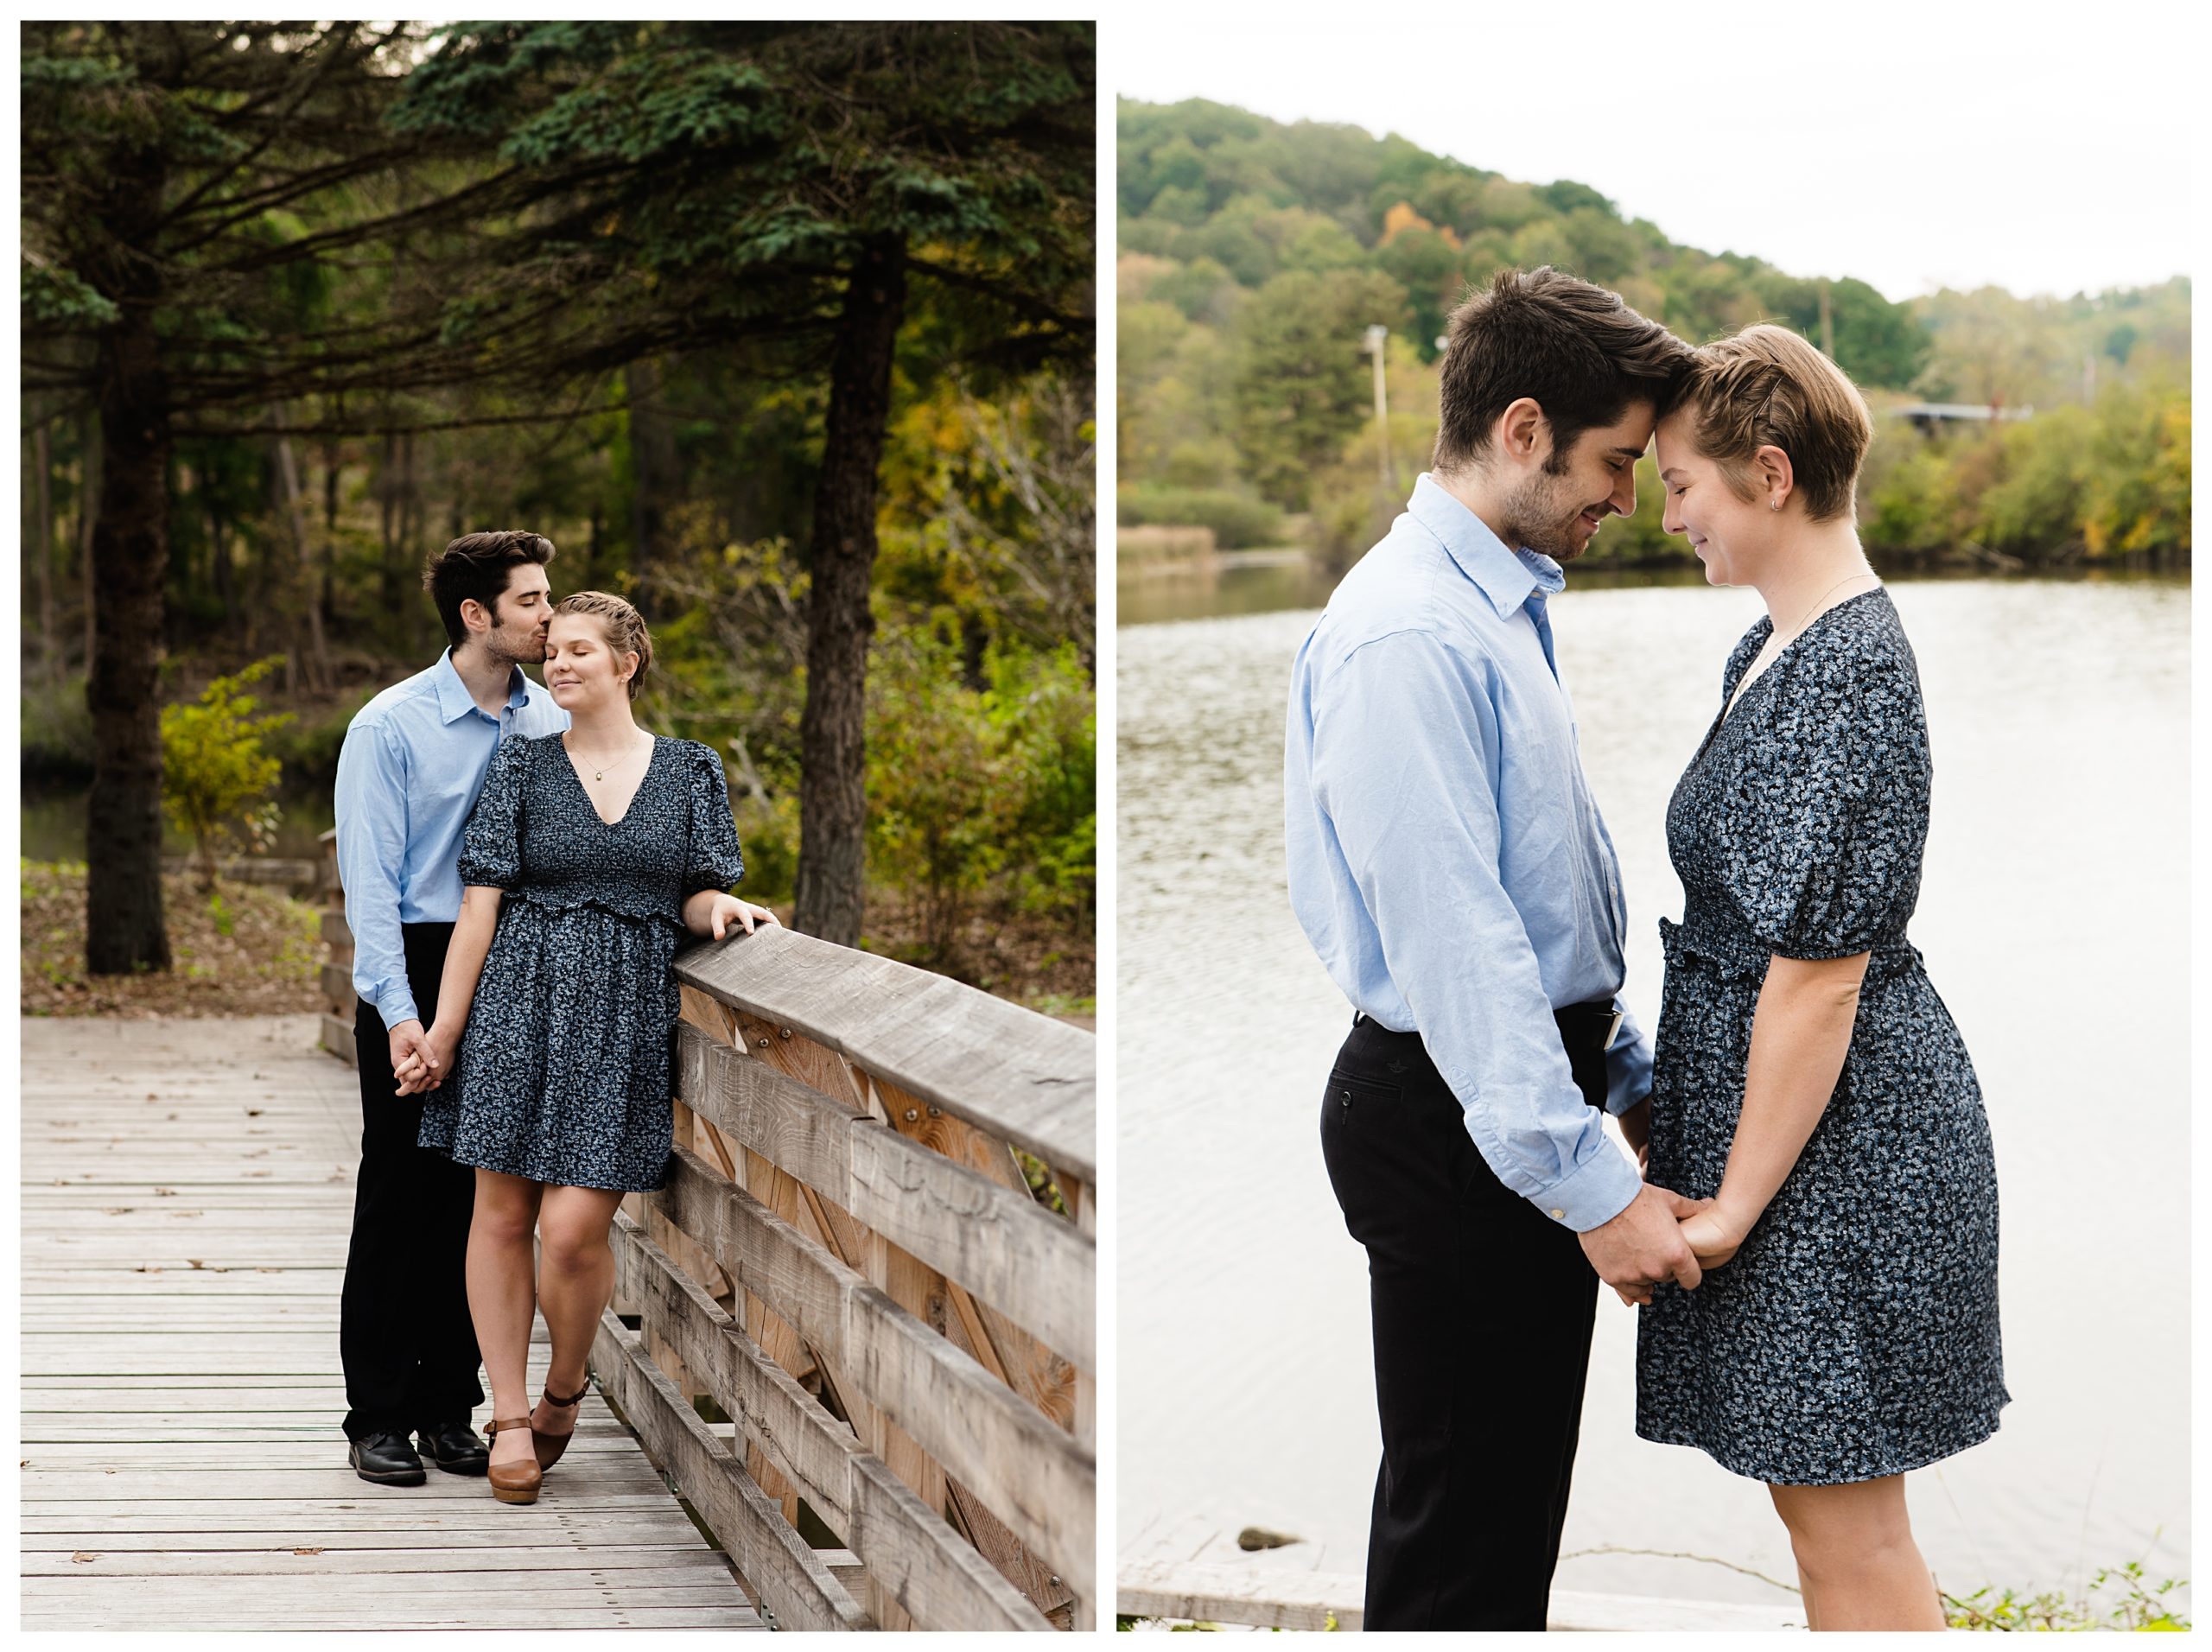 two pictures- one of engaged couple on bridge with boy kissing girl and the other of the couple leaning their foreheads together